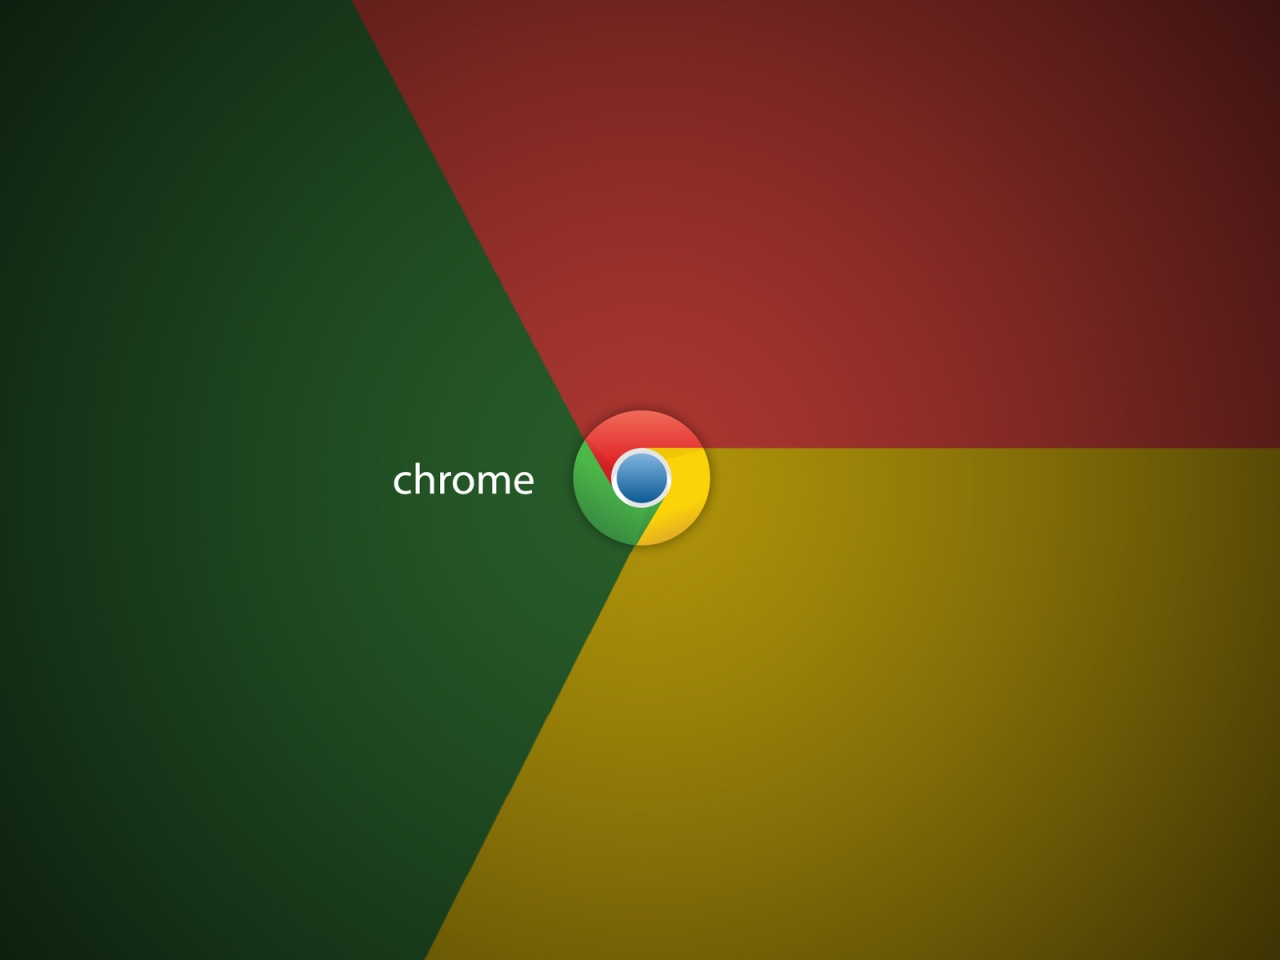 Just Google Chrome for 1280 x 960 resolution